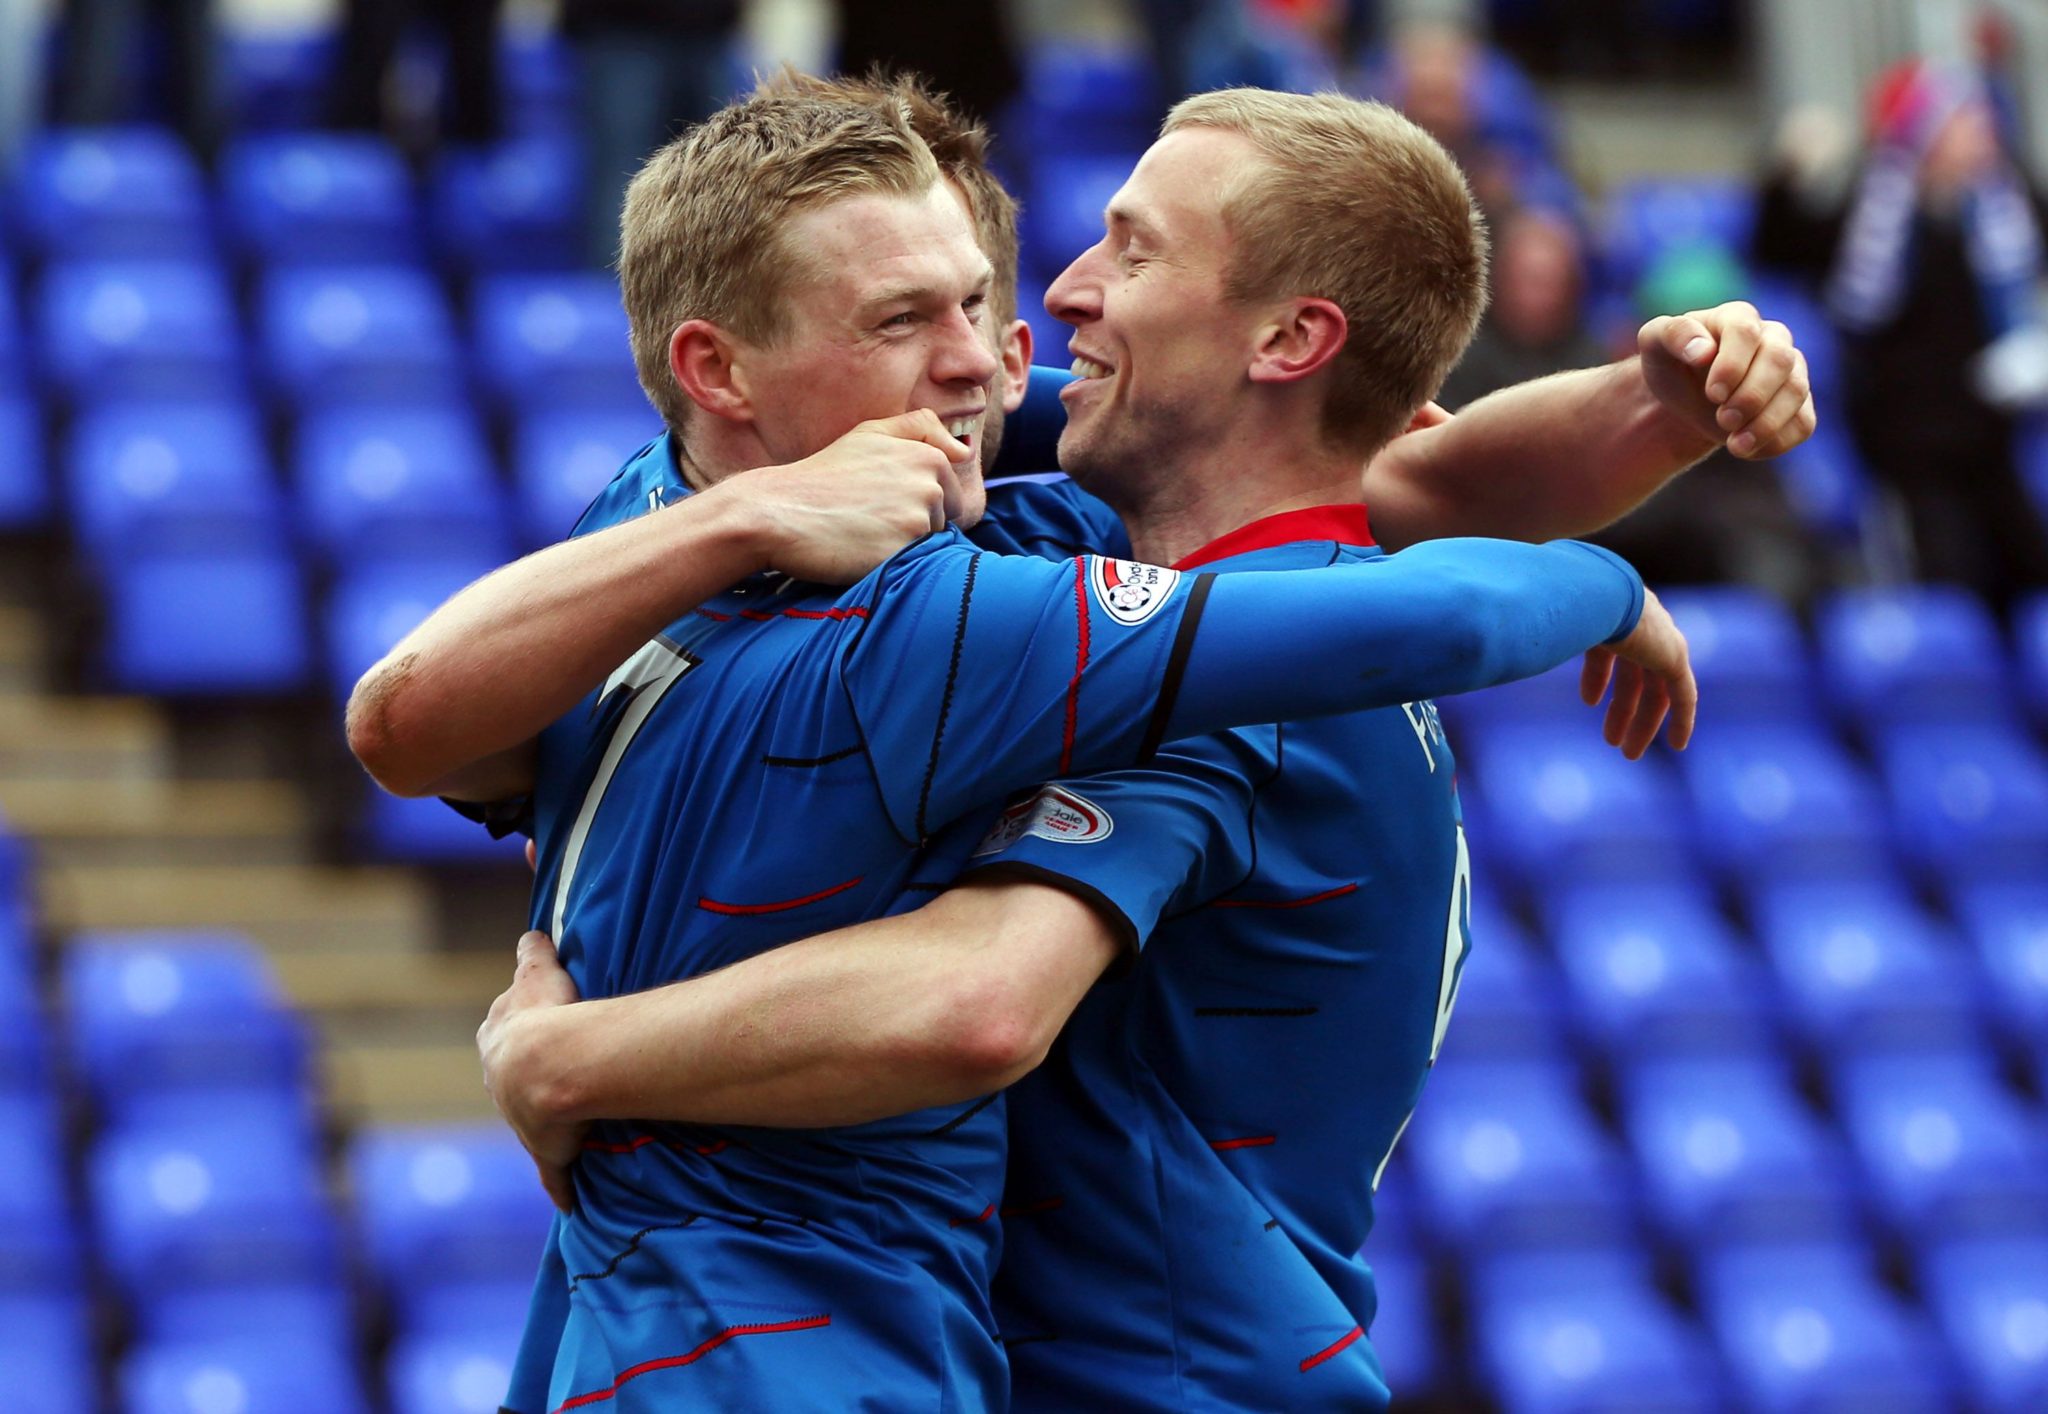 McKay and Doran a lethal pair of Inverness in the Scottish Premier.